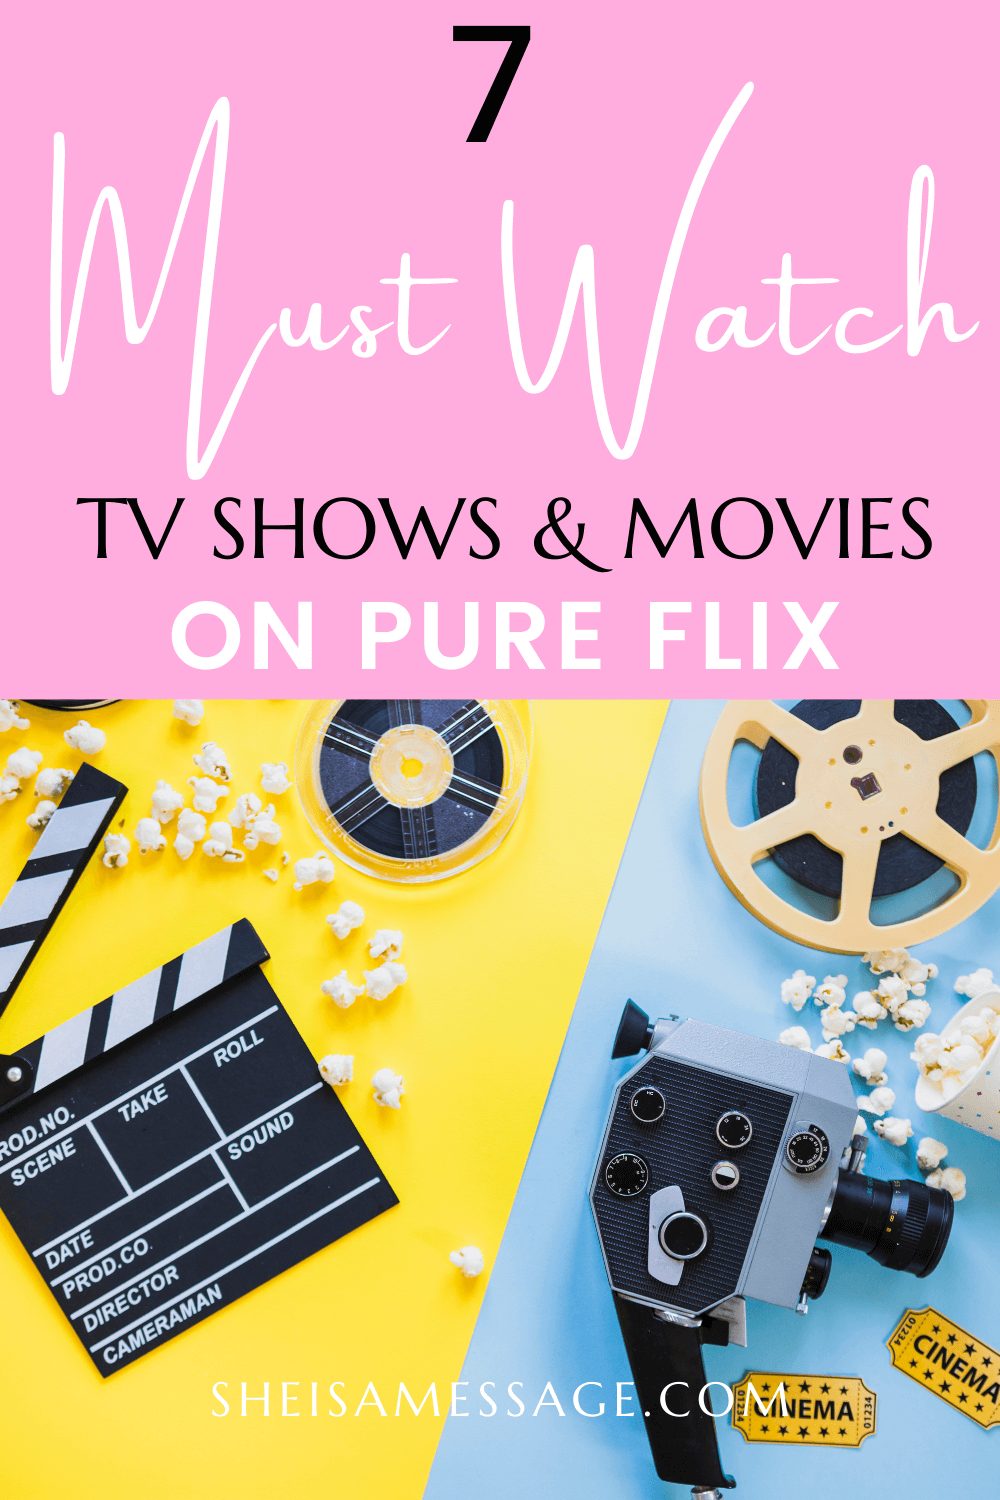 7 of The Best Christian Movies and TV Shows On Pure Flix Pinterest Image